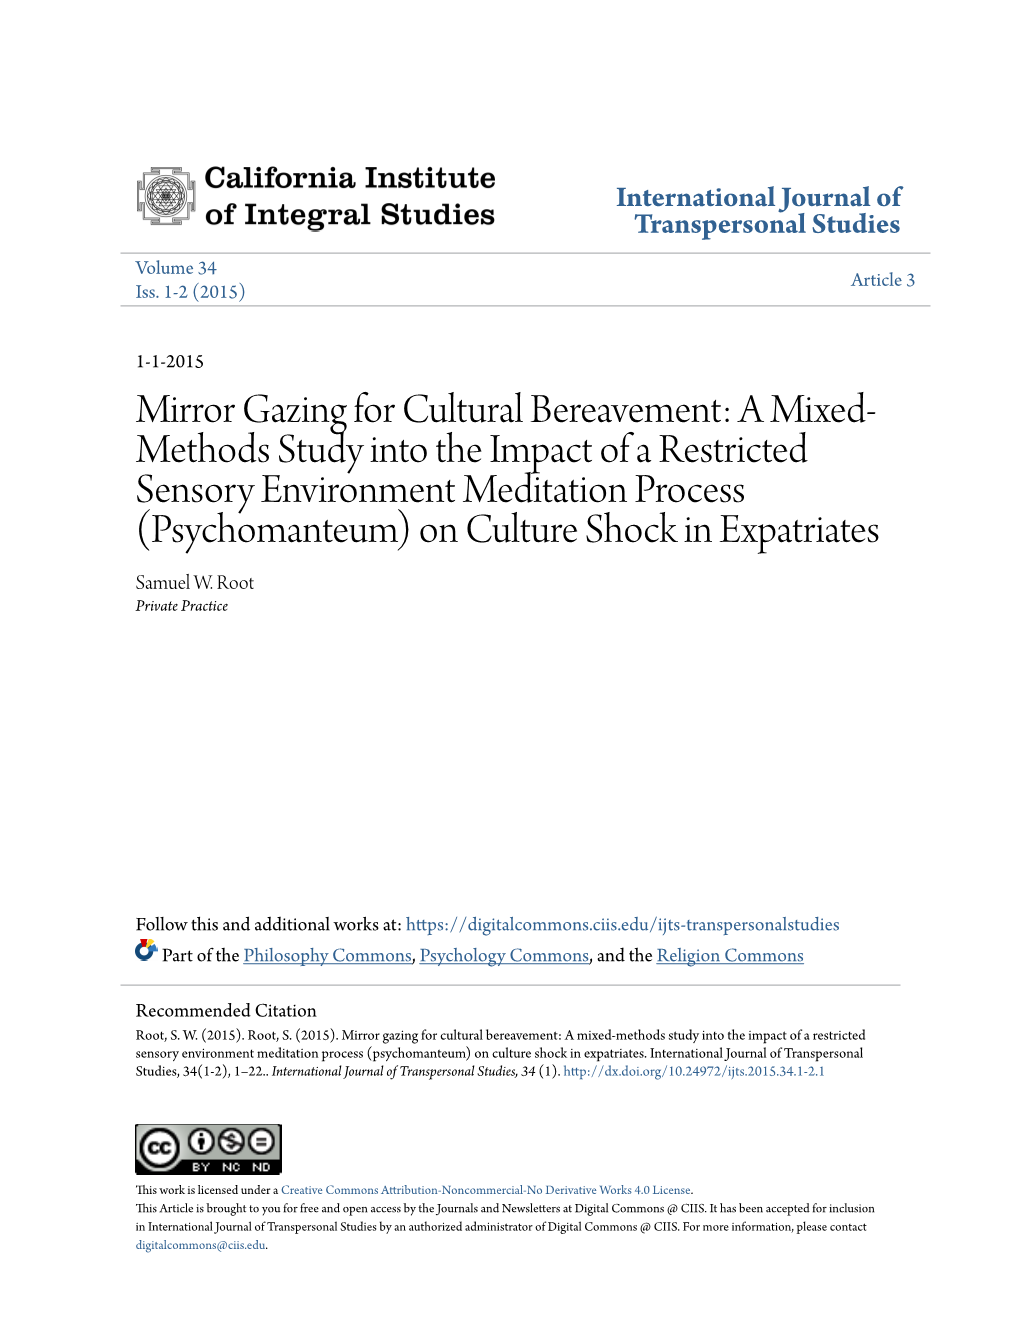 Mirror Gazing for Cultural Bereavement: a Mixed-Methods